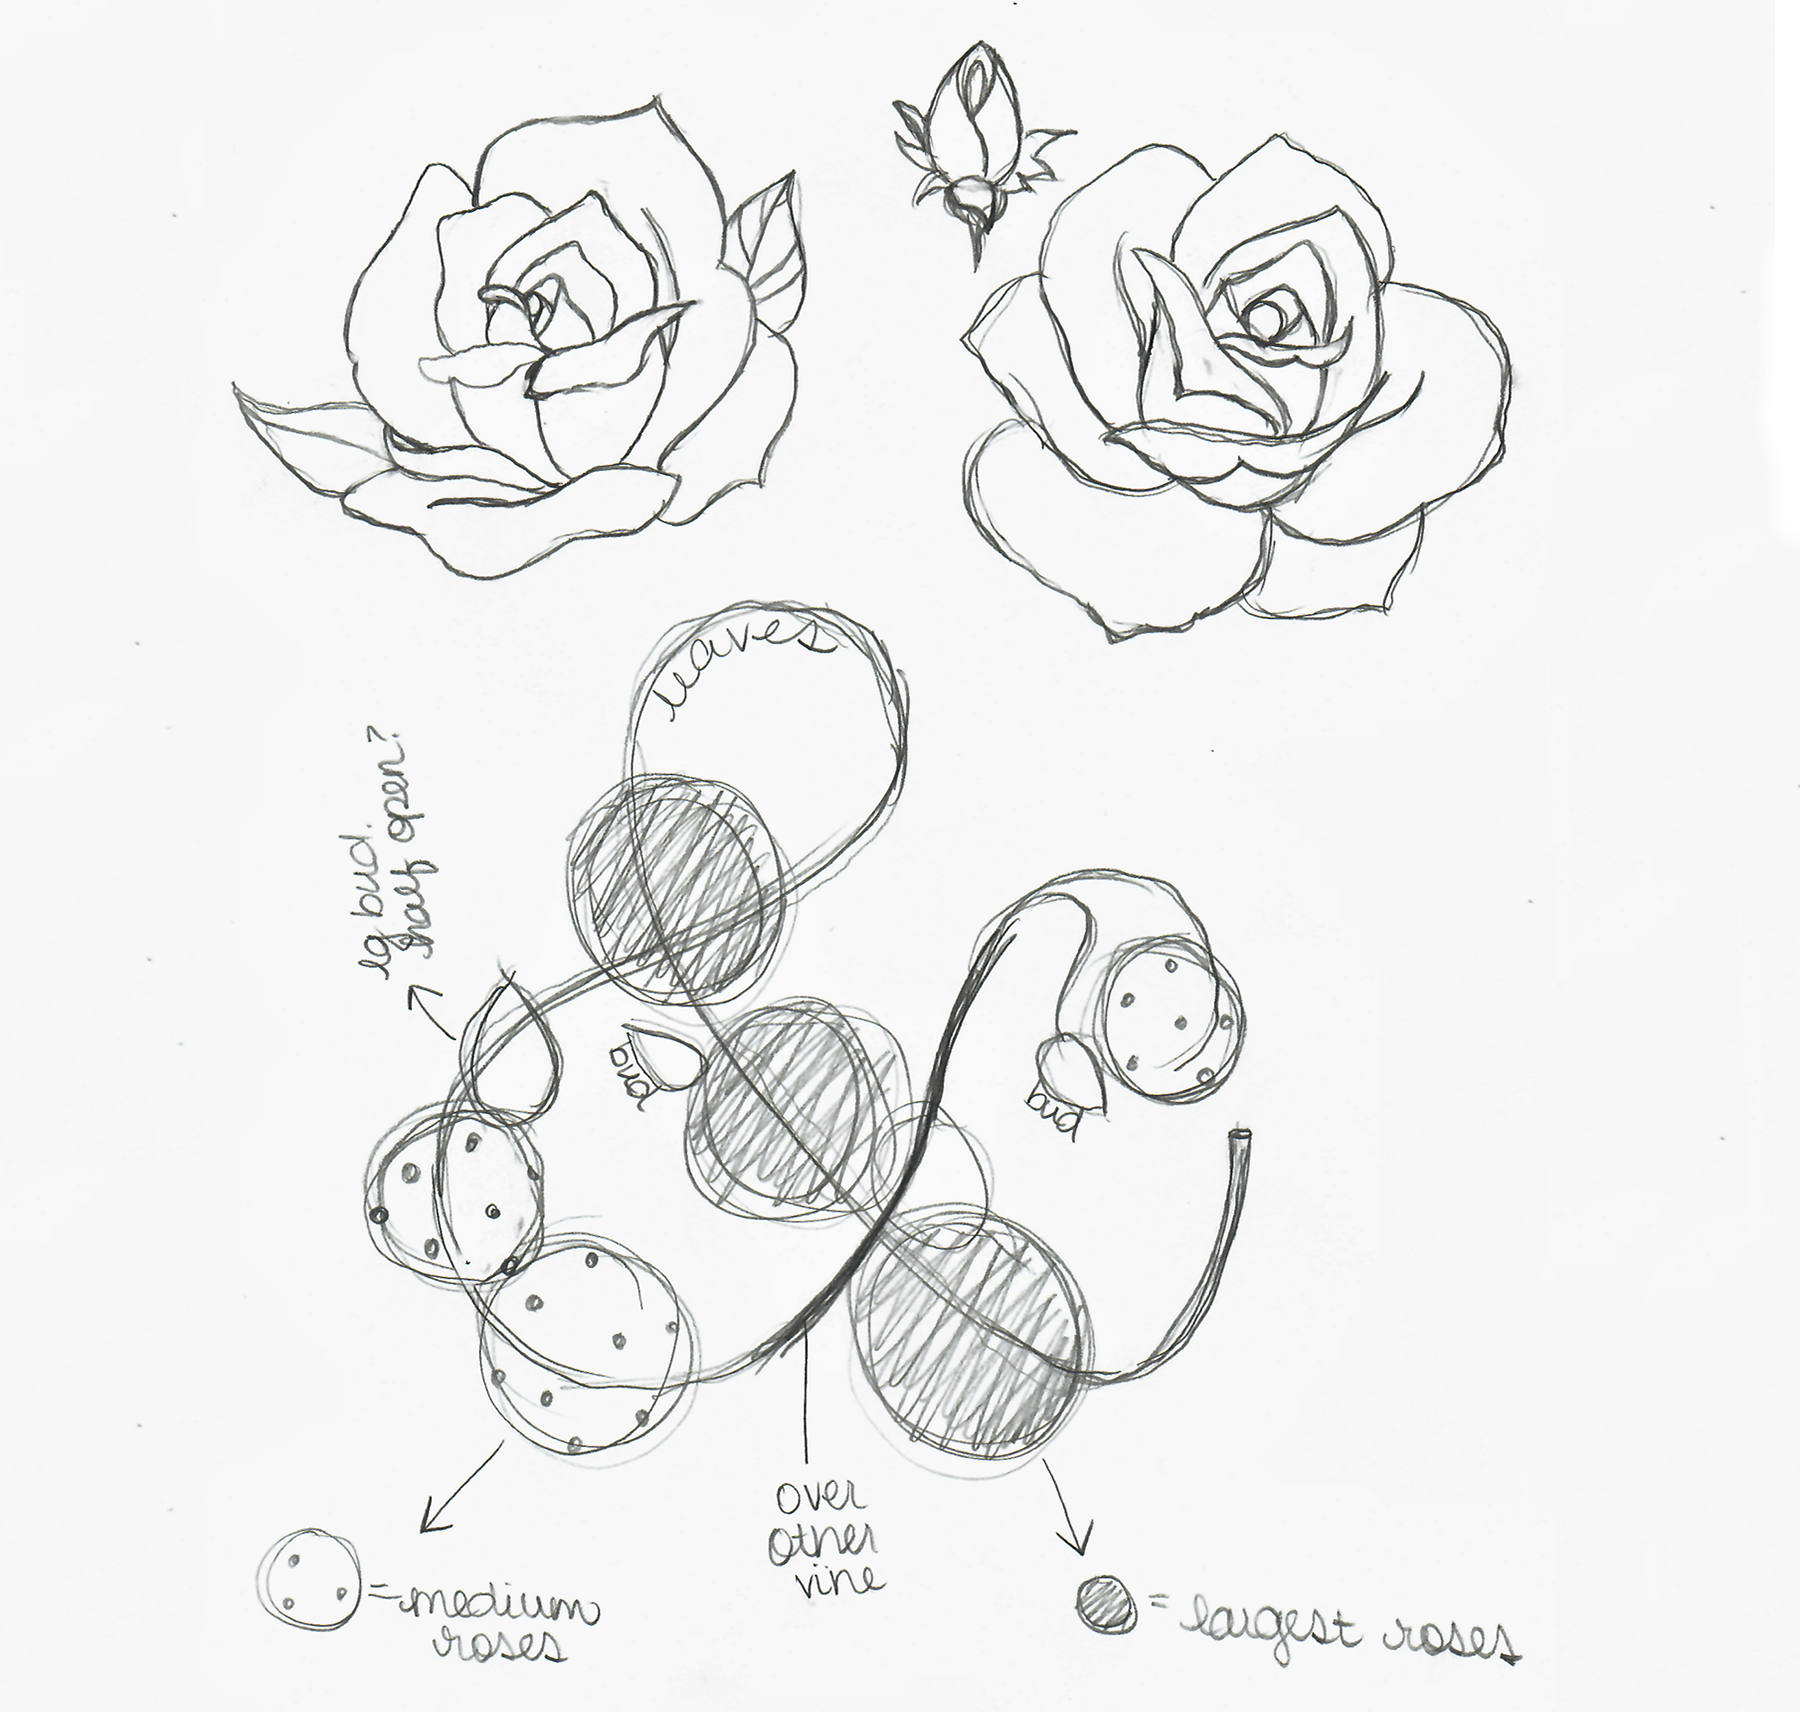 This is another sketch of the floral ampersand I created.